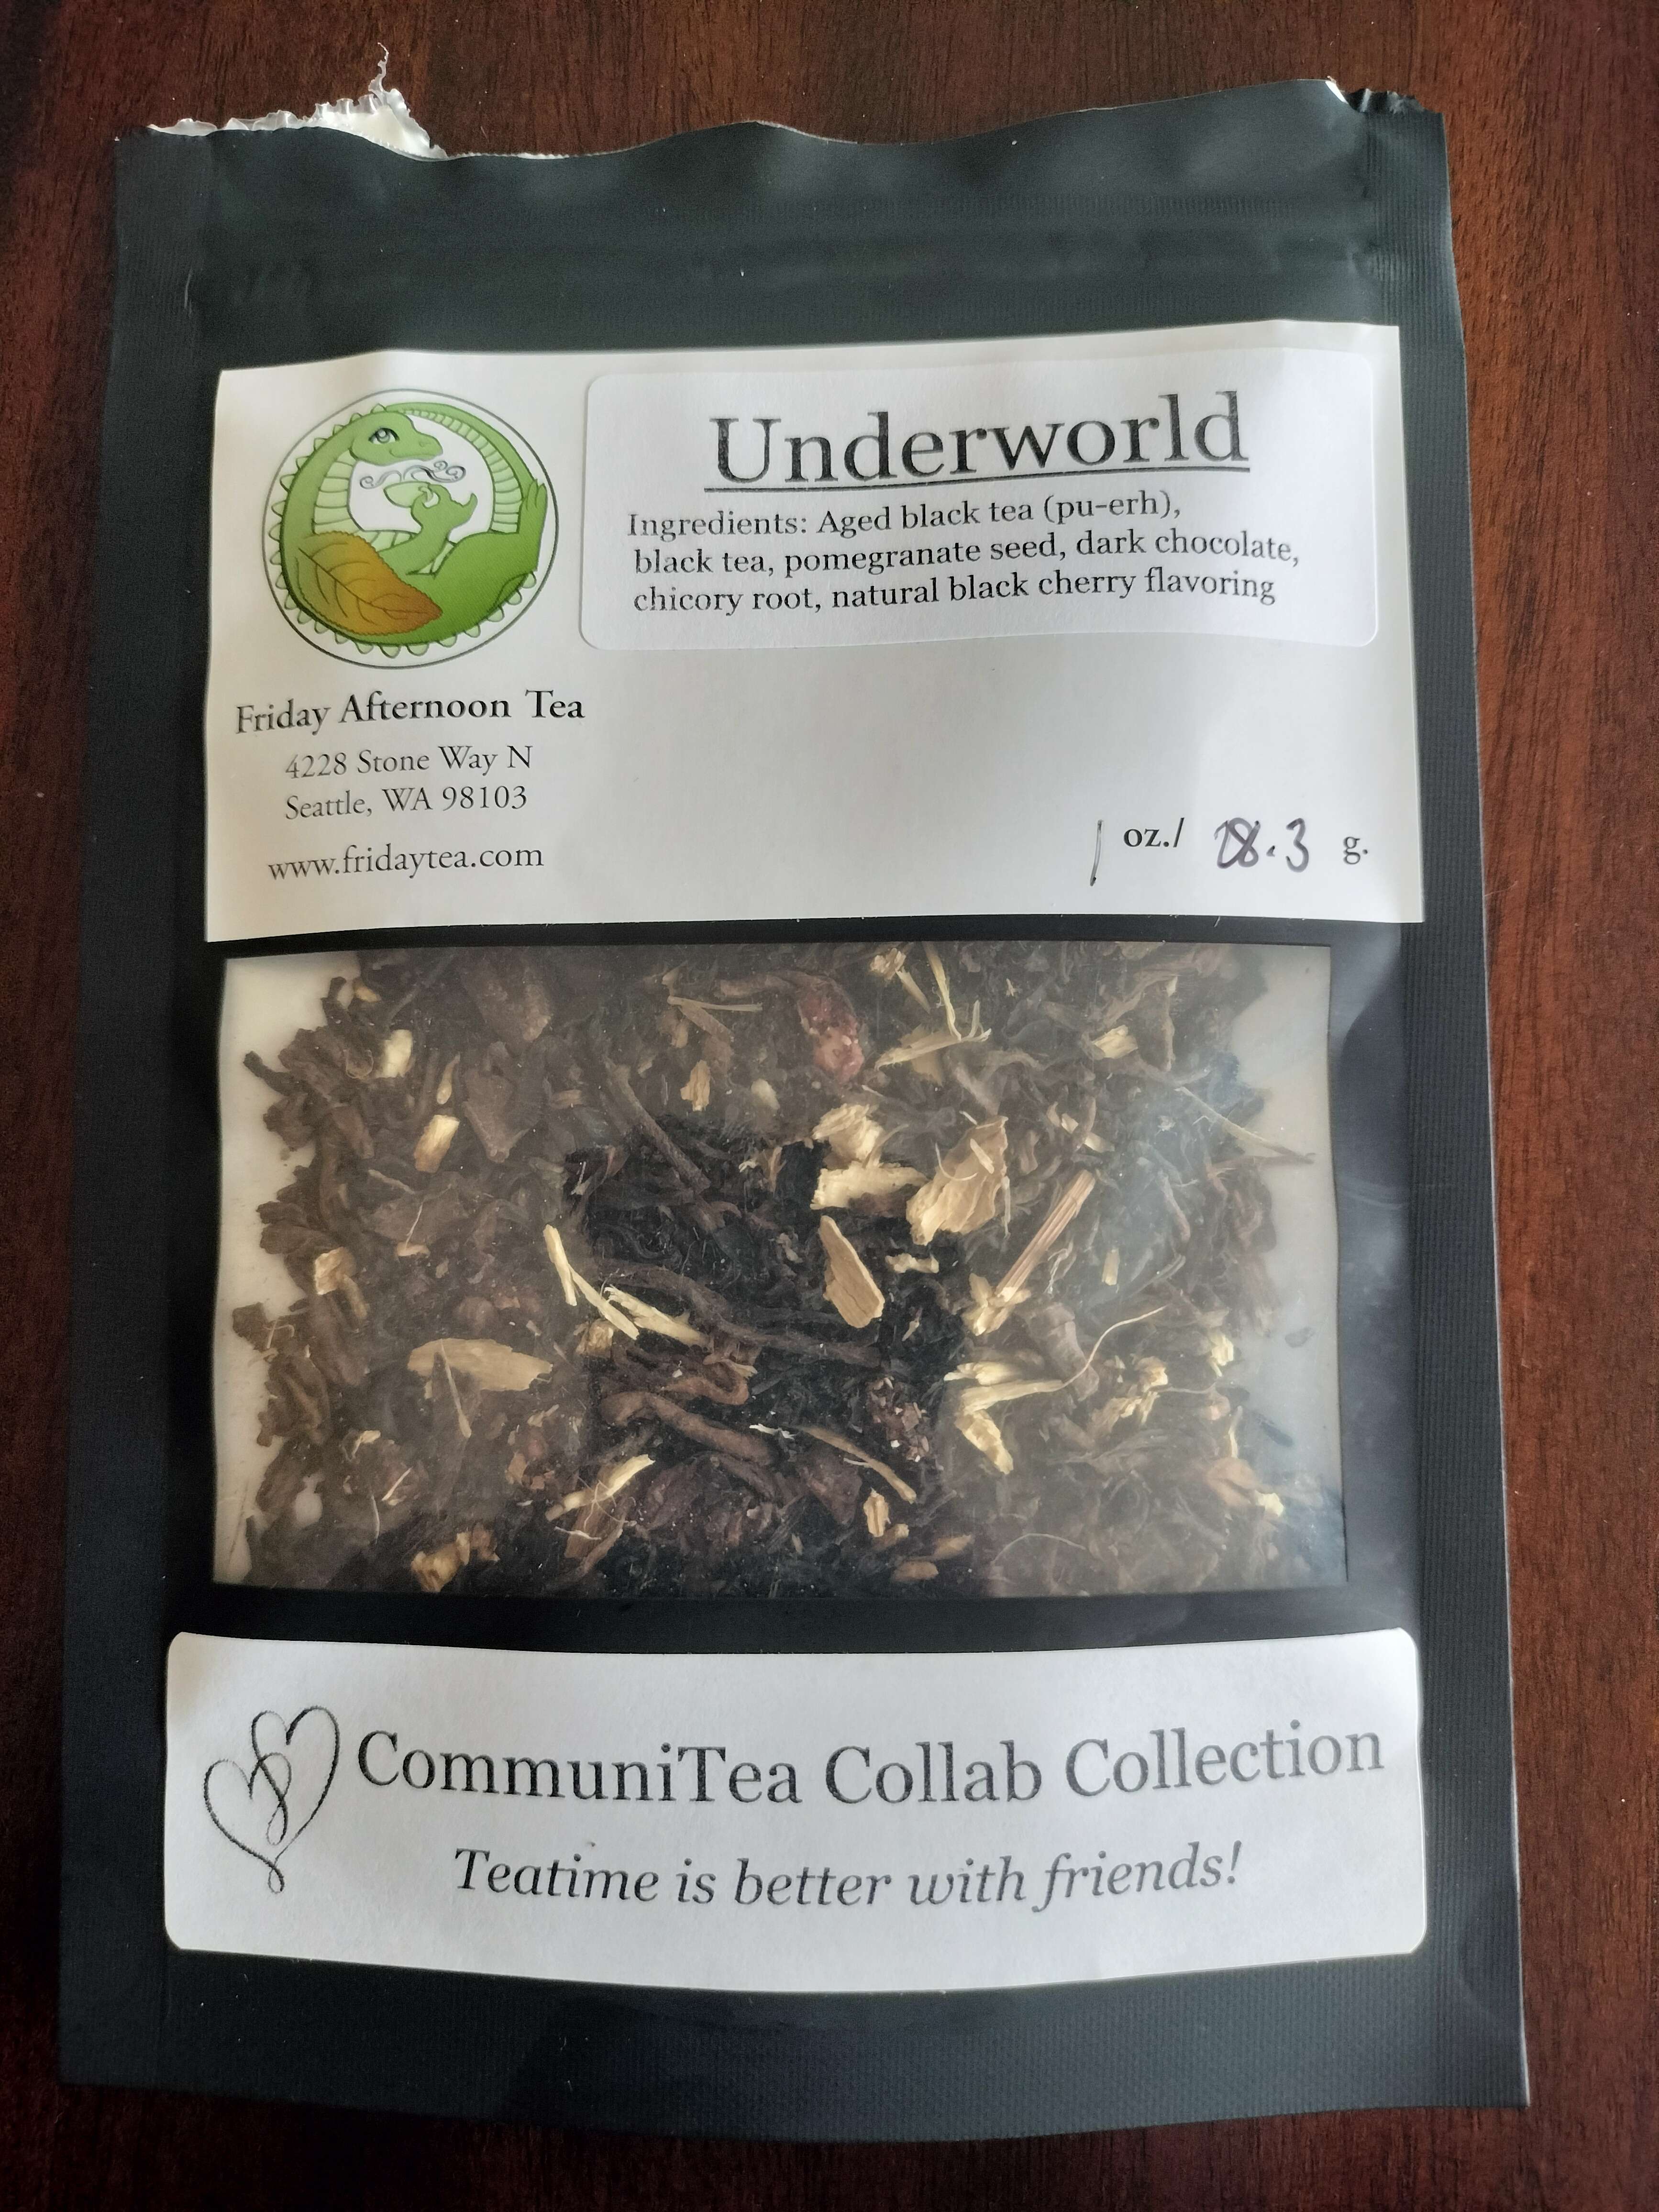 The tea blend Underworld from Friday Afternoon Tea. Ingredients are aged black tea (pu-erh), black tea, pomegranate seed, dark chocolate, chicory root, and natural black cherry flavoring.